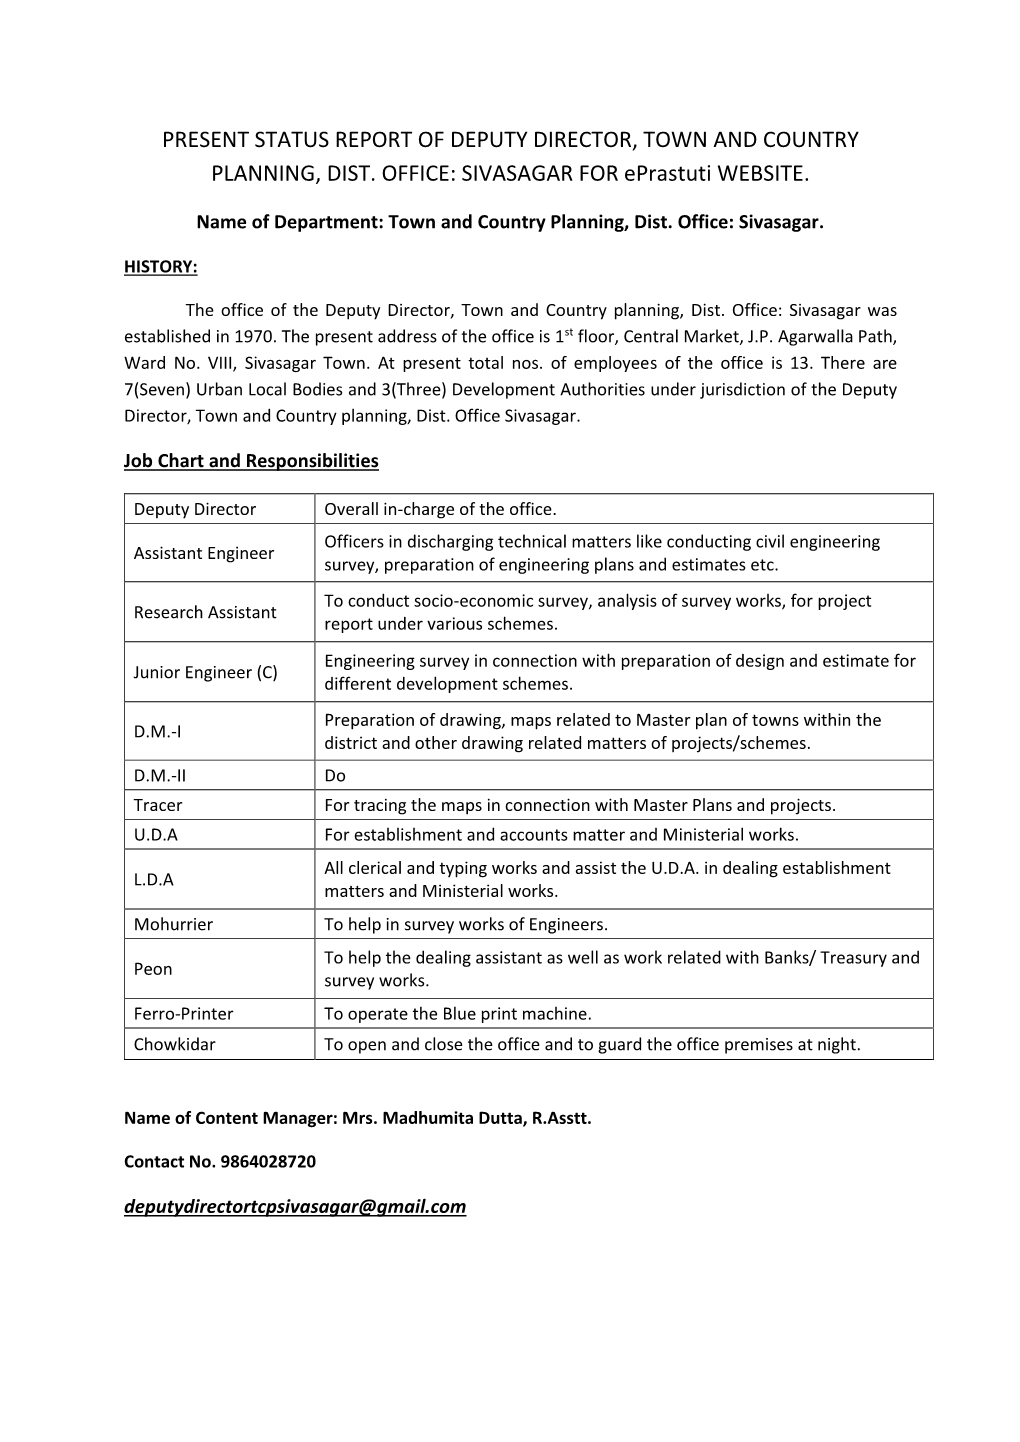 Present Status Report of Deputy Director, Town and Country Planning, Dist